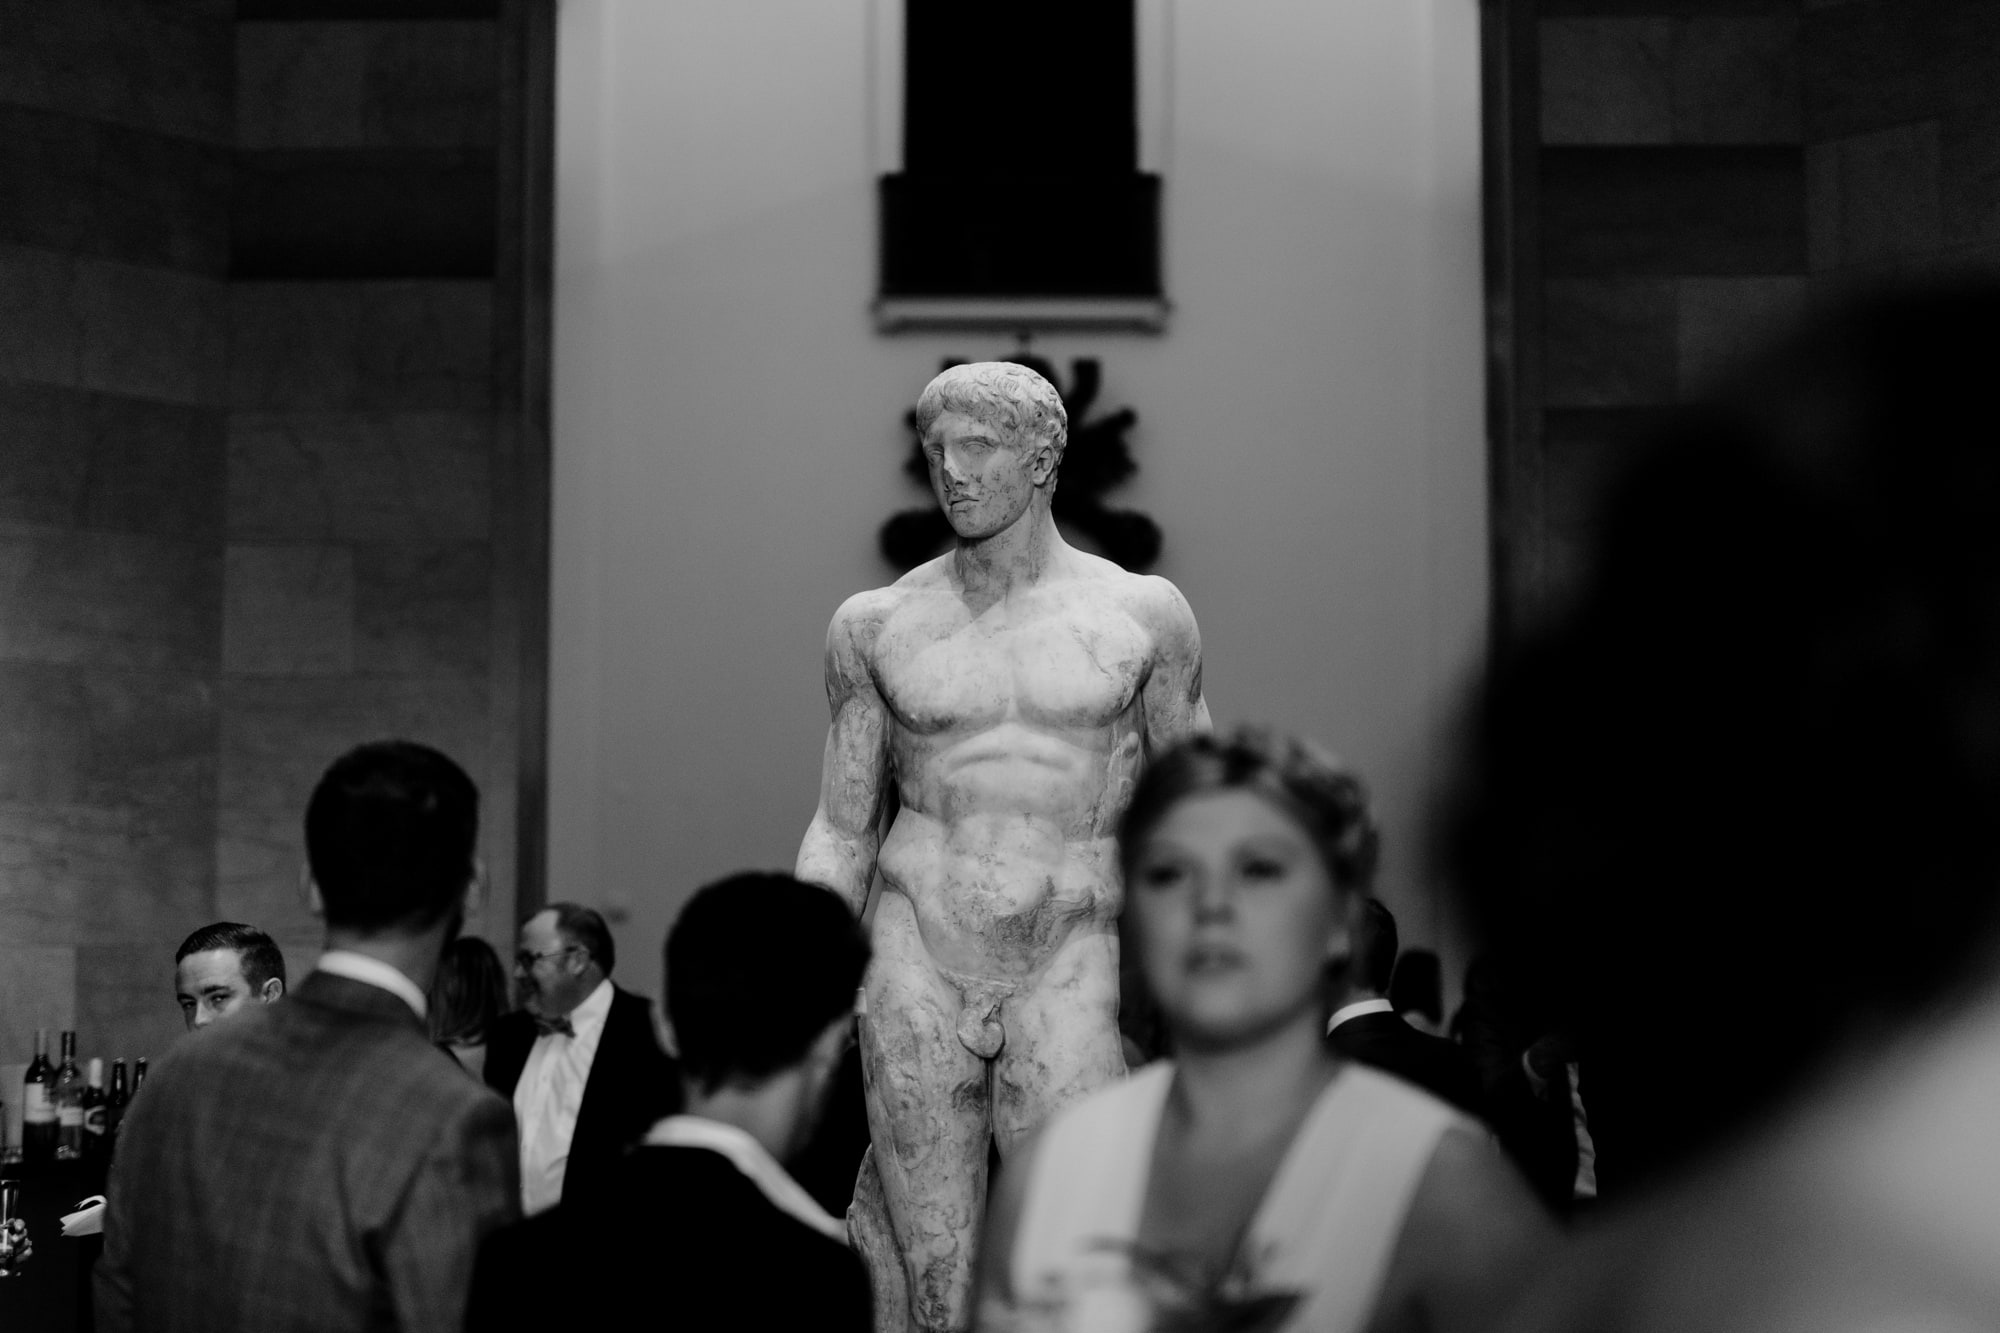 Wedding guests mingle in the Minneapolis Institute of Art, around a large statue of a man.